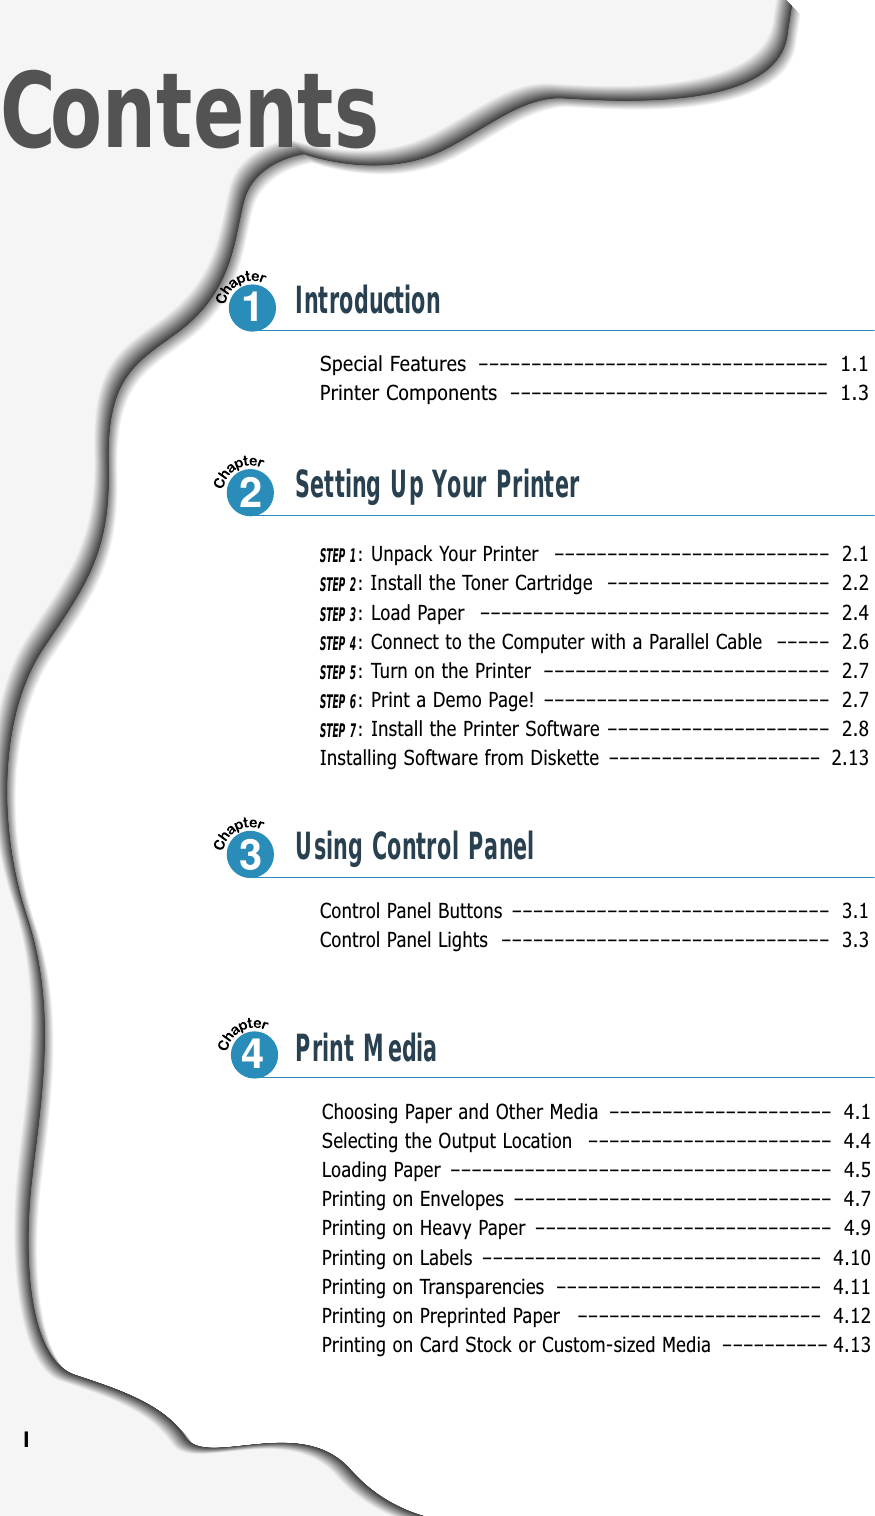 ISpecial Features –––––––––––––––––––––––––––––––––1.1Printer Components ––––––––––––––––––––––––––––––1.3Control Panel Buttons –––––––––––––––––––––––––––––– 3.1Control Panel Lights ––––––––––––––––––––––––––––––– 3.3ContentsIntroductionSTEP 1:Unpack Your Printer –––––––––––––––––––––––––– 2.1STEP 2:Install the Toner Cartridge ––––––––––––––––––––– 2.2STEP 3:Load Paper ––––––––––––––––––––––––––––––––– 2.4STEP 4:Connect to the Computer with a Parallel Cable ––––– 2.6STEP 5:Turn on the Printer ––––––––––––––––––––––––––– 2.7STEP 6:Print a Demo Page! ––––––––––––––––––––––––––– 2.7STEP 7:Install the Printer Software ––––––––––––––––––––– 2.8Installing Software from Diskette –––––––––––––––––––– 2.13Choosing Paper and Other Media ––––––––––––––––––––– 4.1Selecting the Output Location ––––––––––––––––––––––– 4.4Loading Paper –––––––––––––––––––––––––––––––––––– 4.5Printing on Envelopes –––––––––––––––––––––––––––––– 4.7Printing on Heavy Paper –––––––––––––––––––––––––––– 4.9Printing on Labels –––––––––––––––––––––––––––––––– 4.10Printing on Transparencies ––––––––––––––––––––––––– 4.11Printing on Preprinted Paper ––––––––––––––––––––––– 4.12Printing on Card Stock or Custom-sized Media –––––––––– 4.1312Setting Up Your Printer3Using Control Panel4Print Media